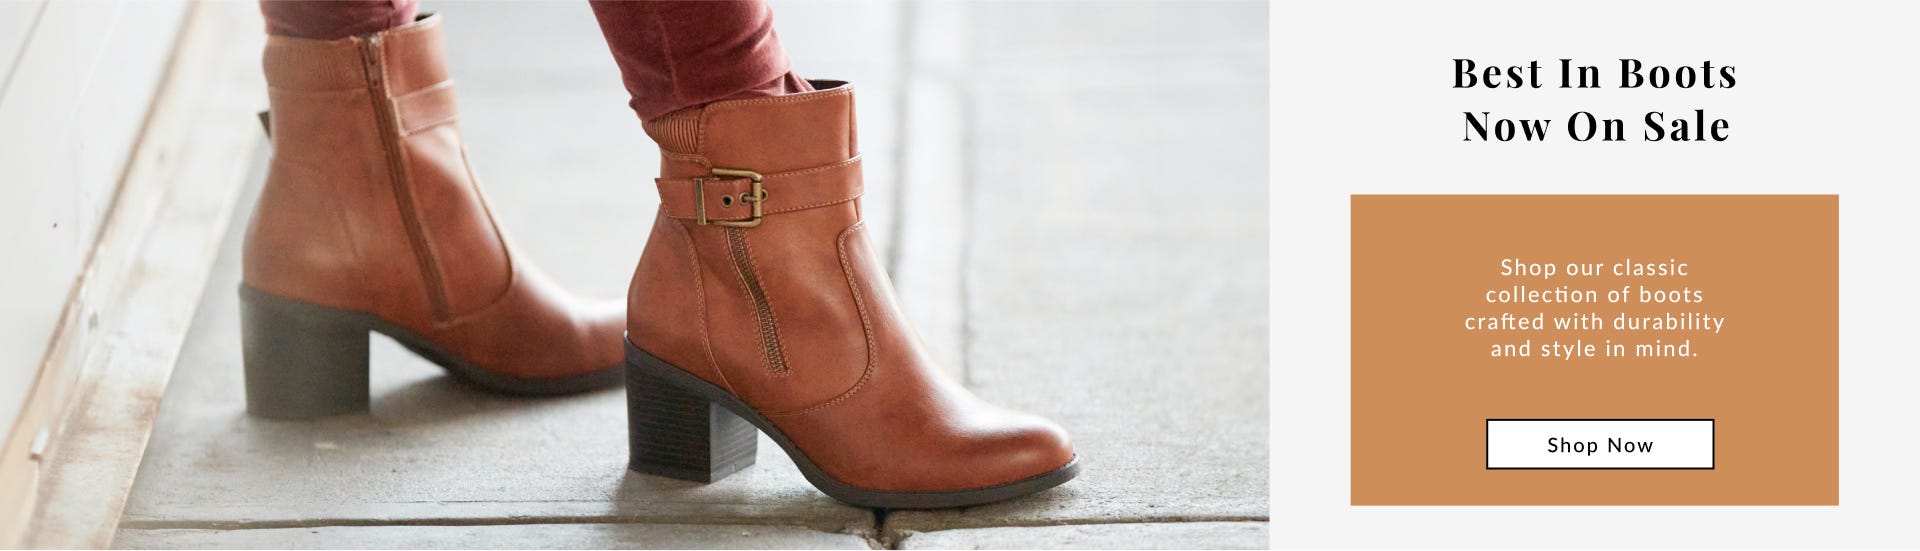 Best in Boots Now on Sale | Shop Now